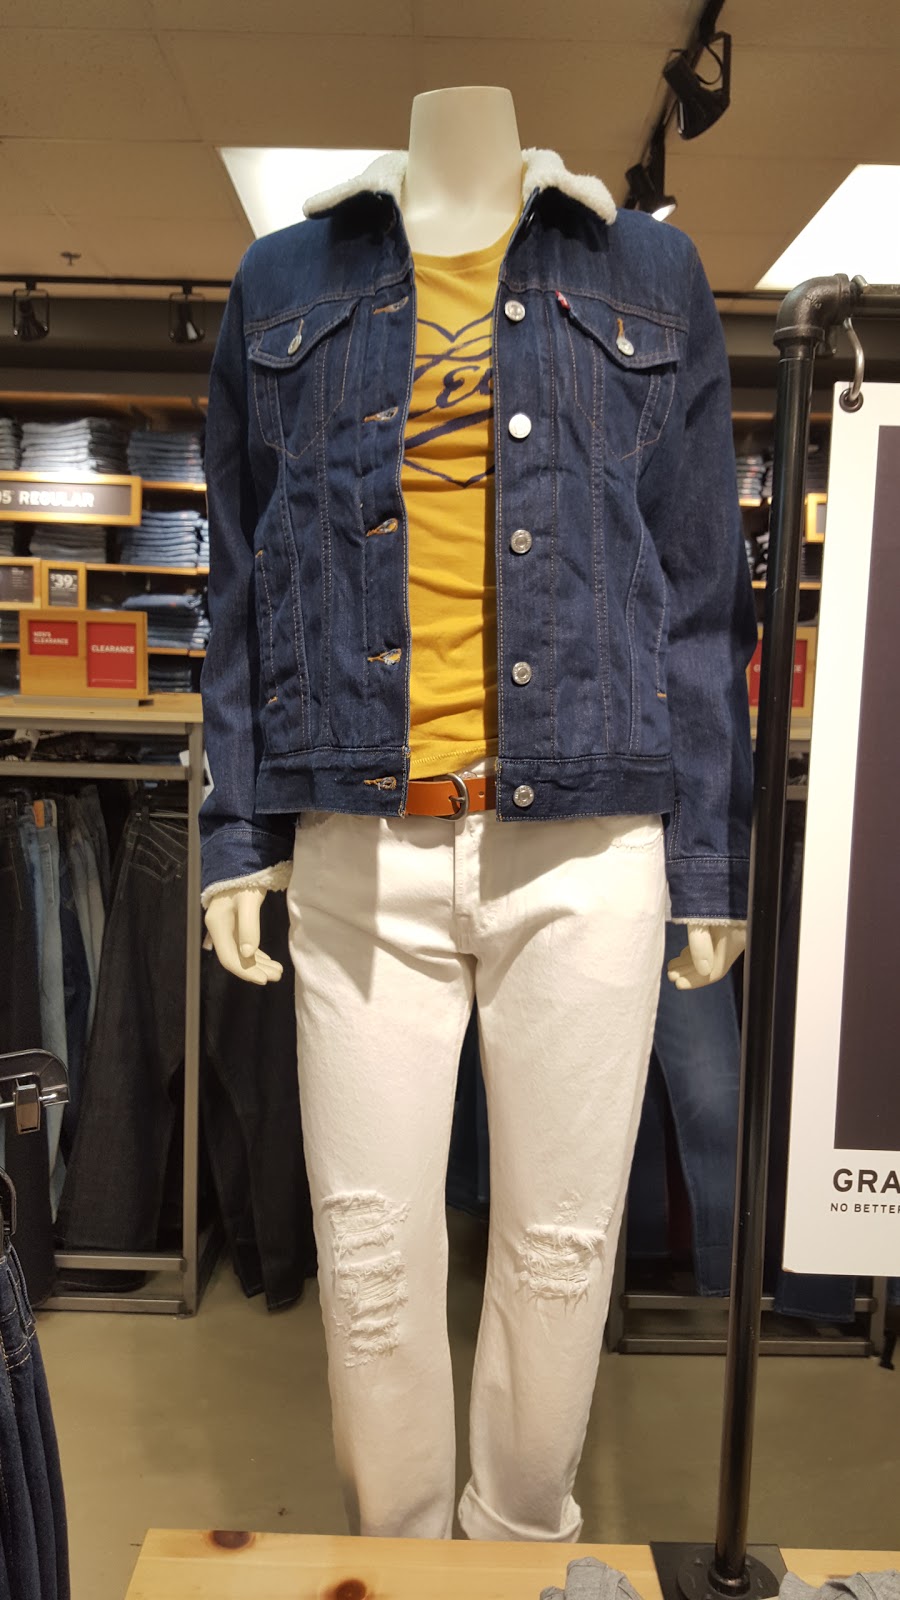 Levis Outlet Store | 1018 Tanger Mall Dr #1018, Riverhead, NY 11901 | Phone: (631) 208-3683